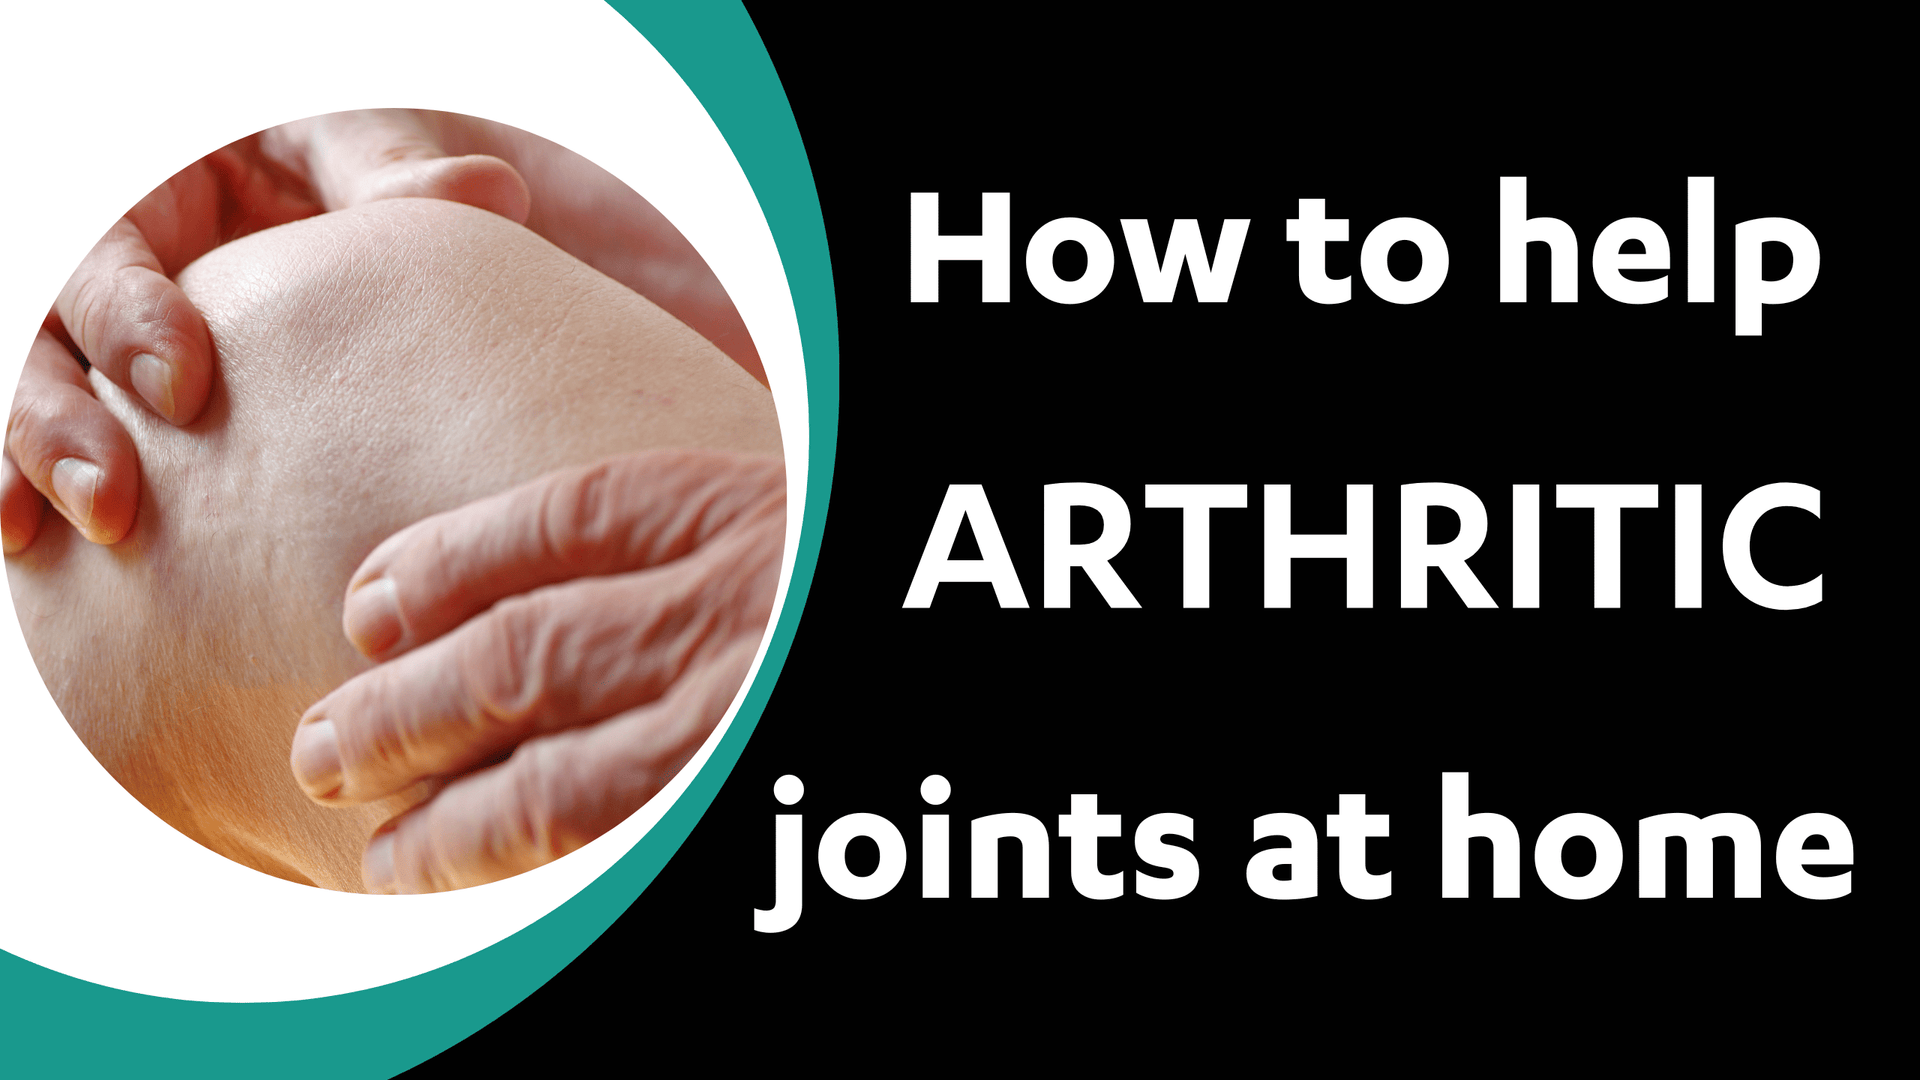 Painful joints that are affected by the changes in the weather? It could be arthritis: What is it and what does Dr Kez prescribe for helping to heal arthritis at home? - Dr Kez Chirolab 